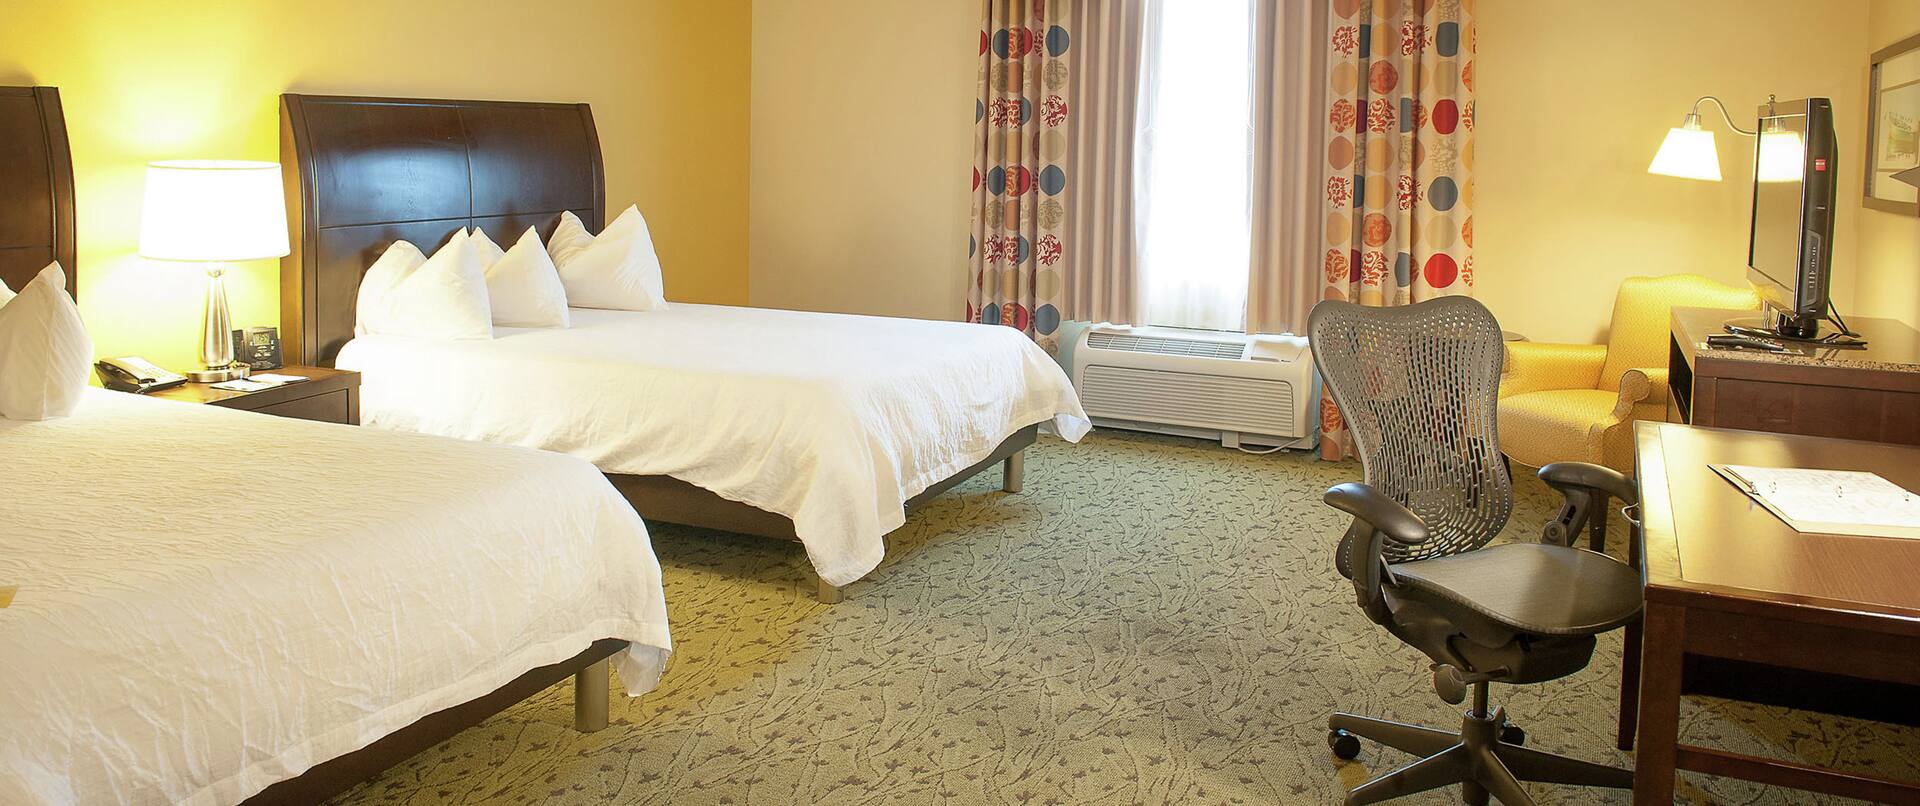 Accessible Guestroom with Two Queen Beds, Lounge Area, Work Desk, and Room Technology